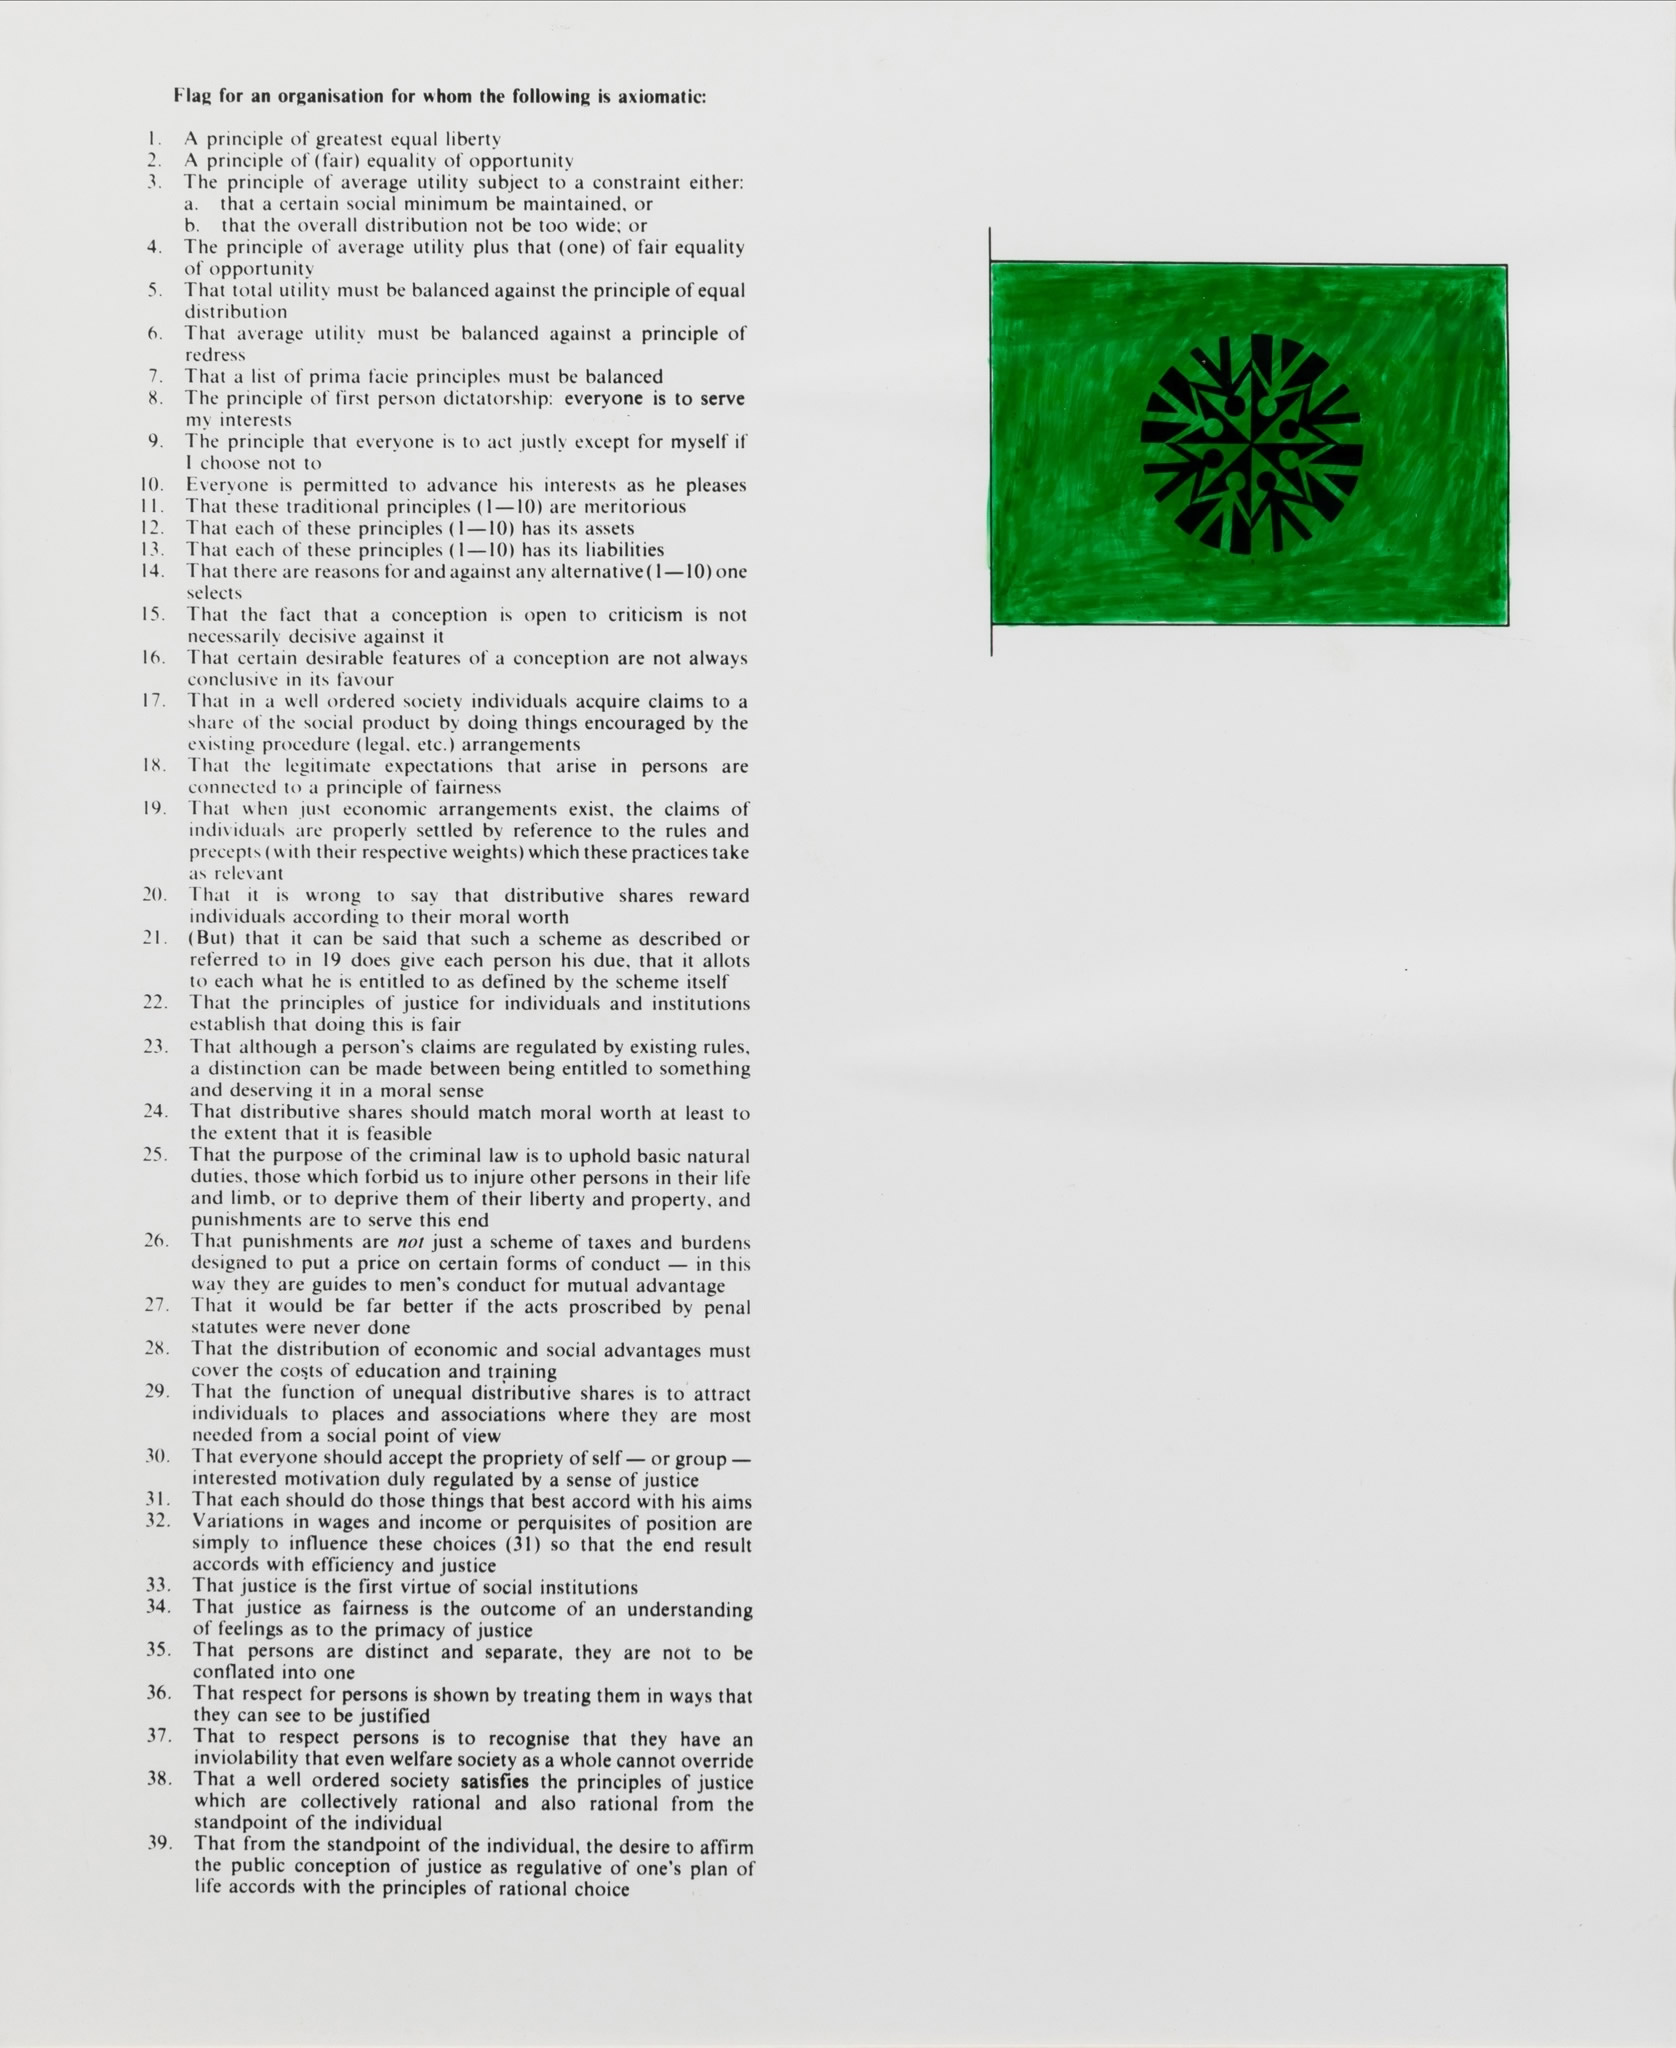 Art & Language: 4 Flags for Organisations (58.4 x 48 cm) 1978.